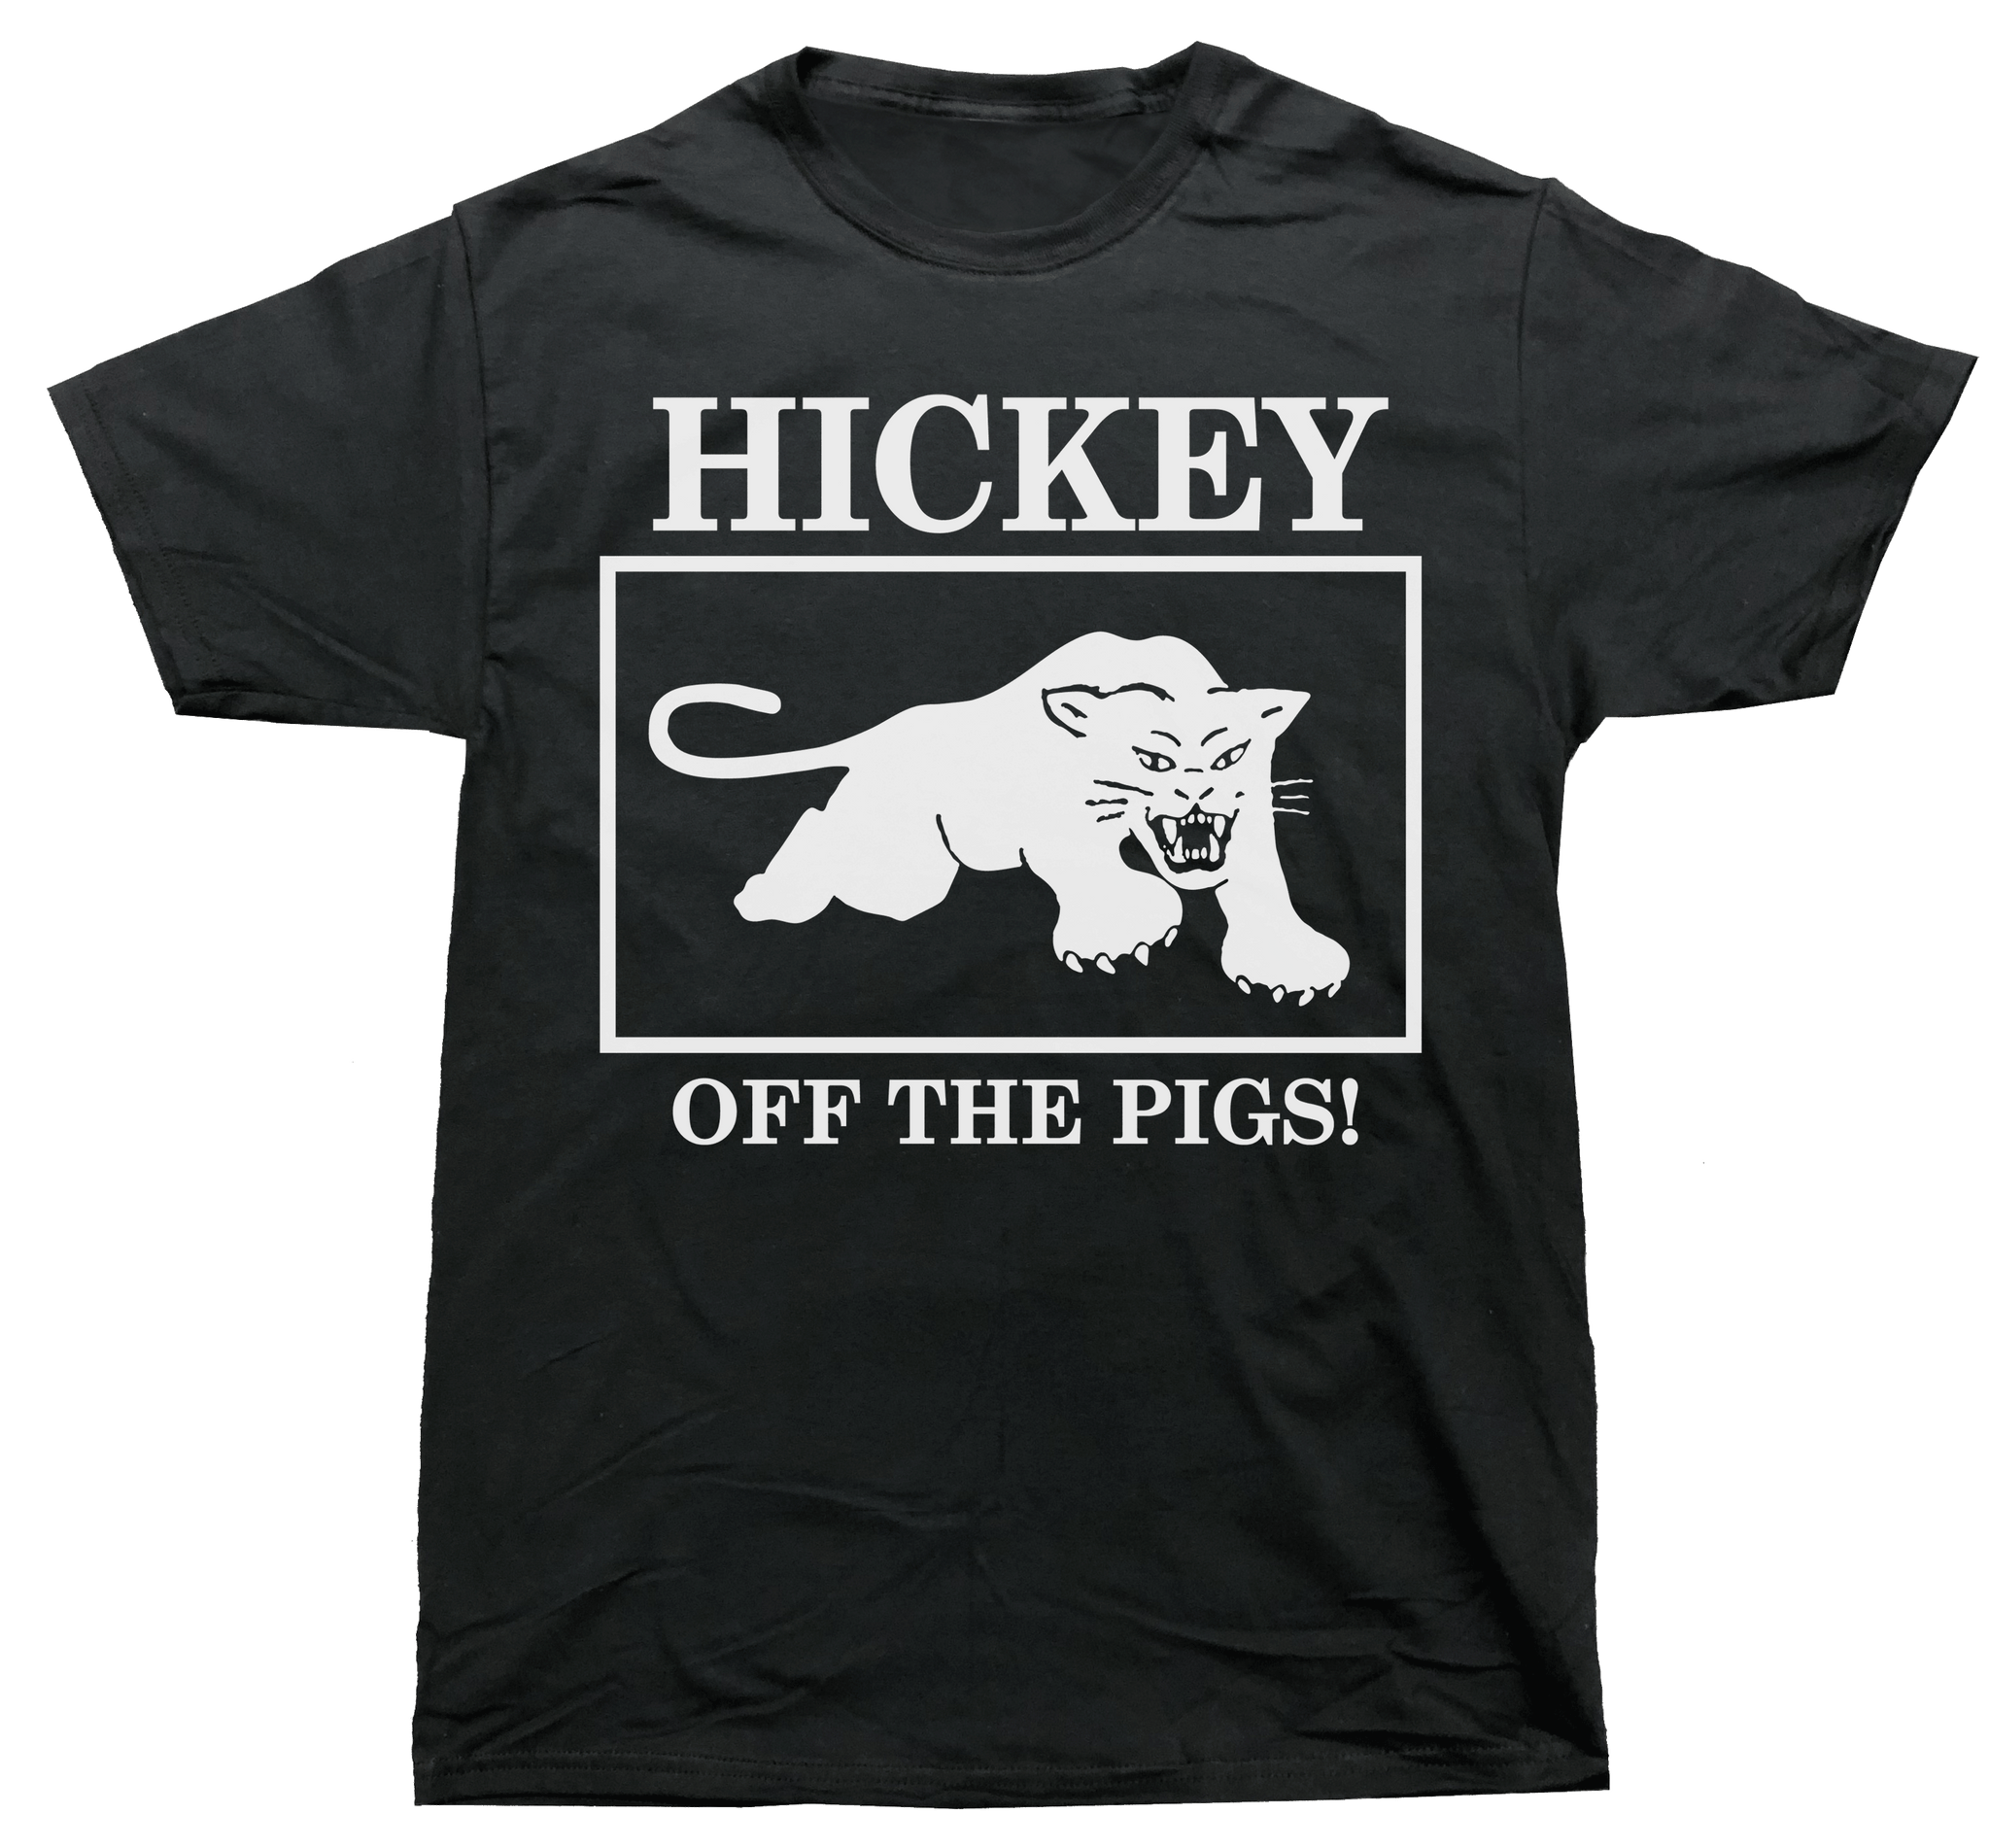 HICKEY - Off the Pigs (black) SHIRT